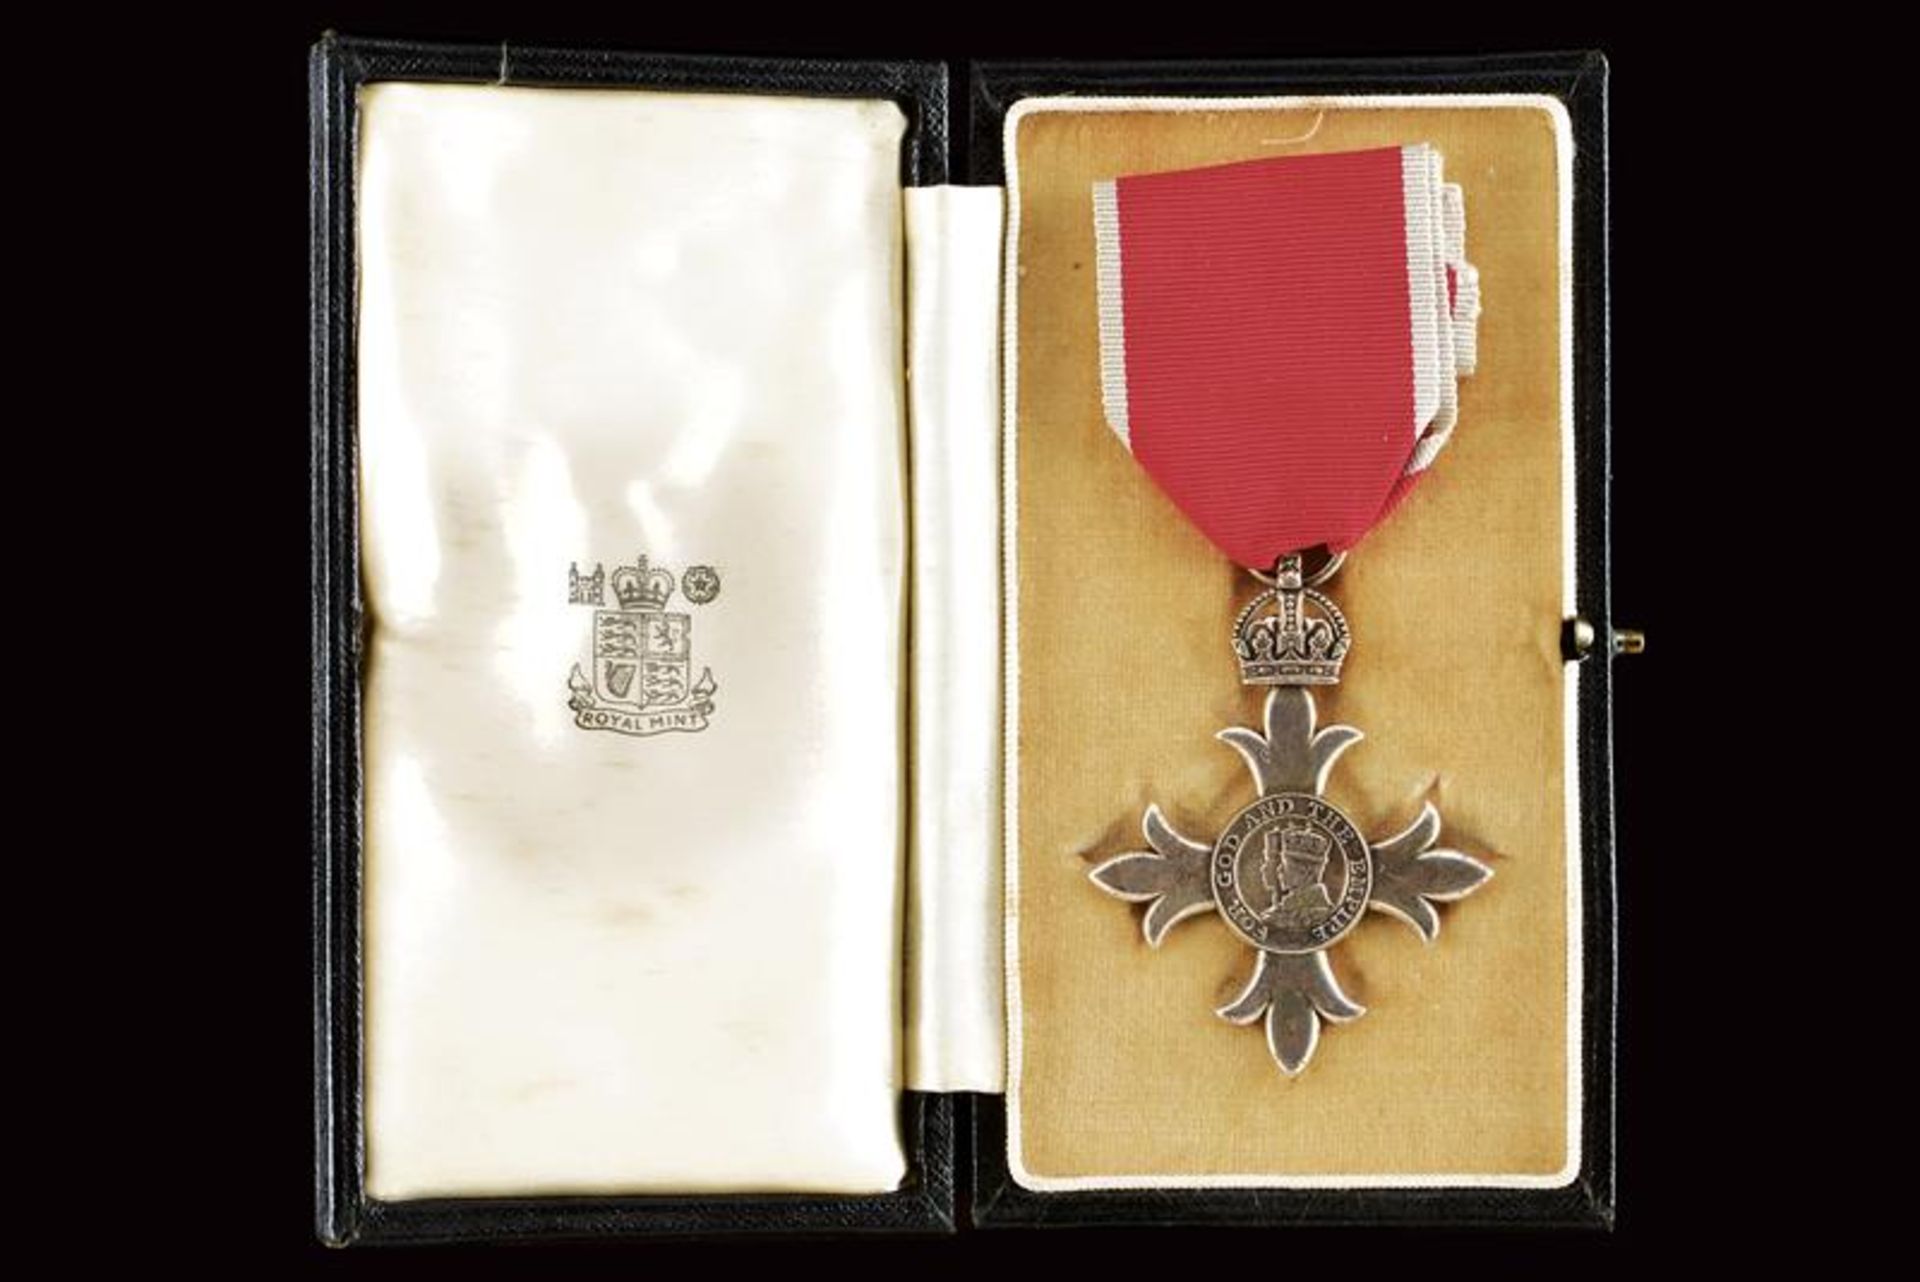 Order of the British Empire (1917 - today)